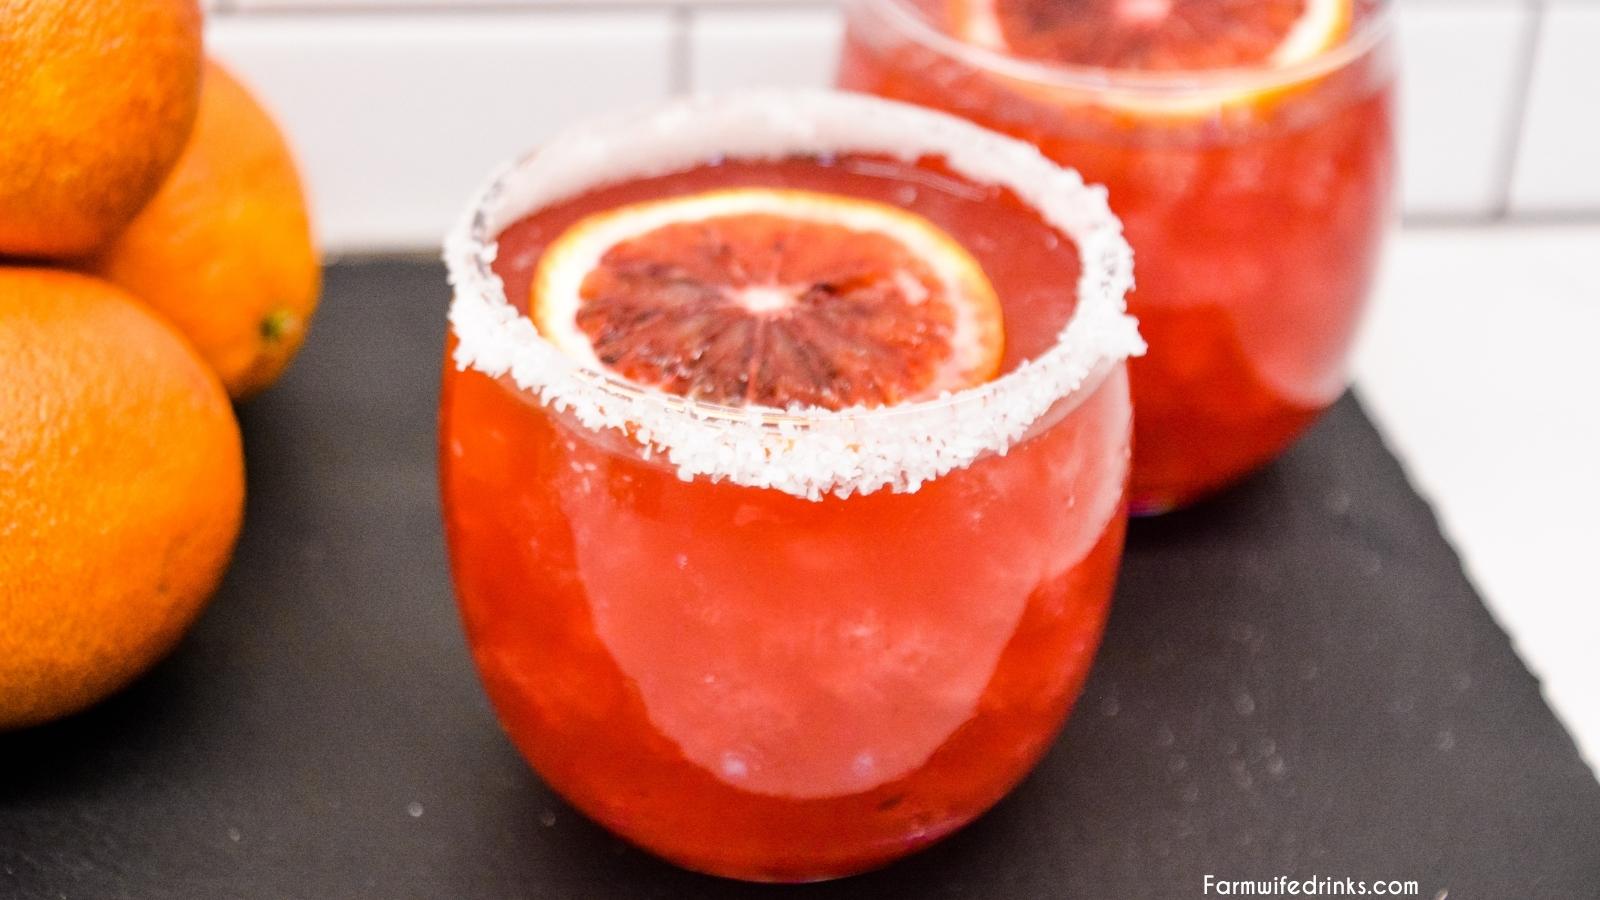 This simple blood orange margarita is made with fresh blood oranges and limes, simple syrup, tequila, and Cointreau for a quick and delicious margarita.